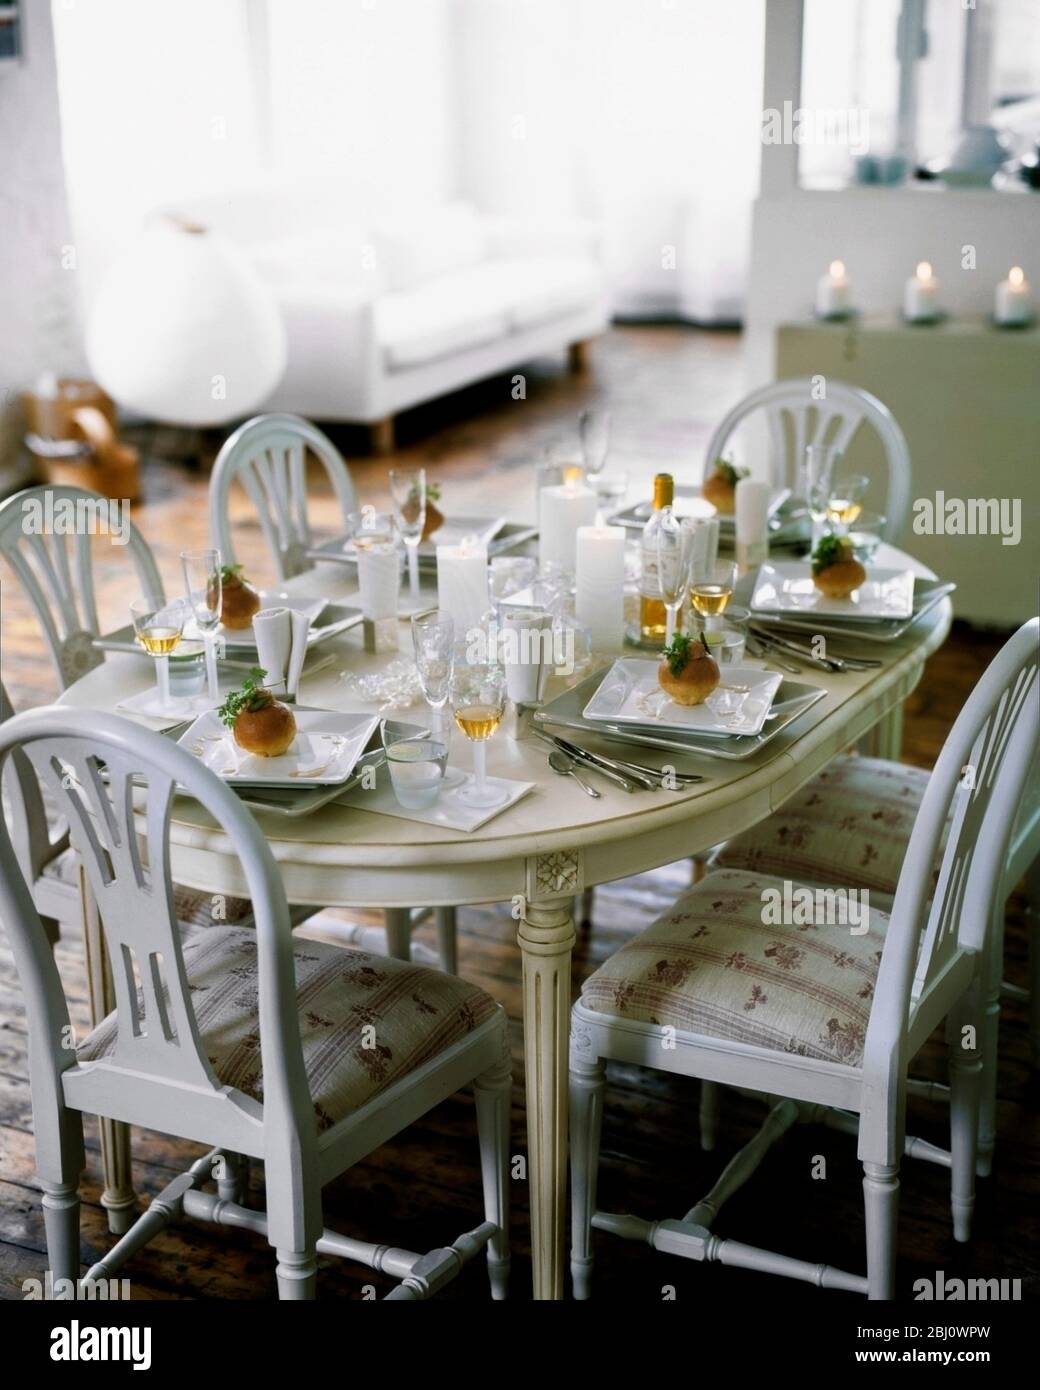 Celebration dinner tabel laid in chic studio style apartment - Stock Photo